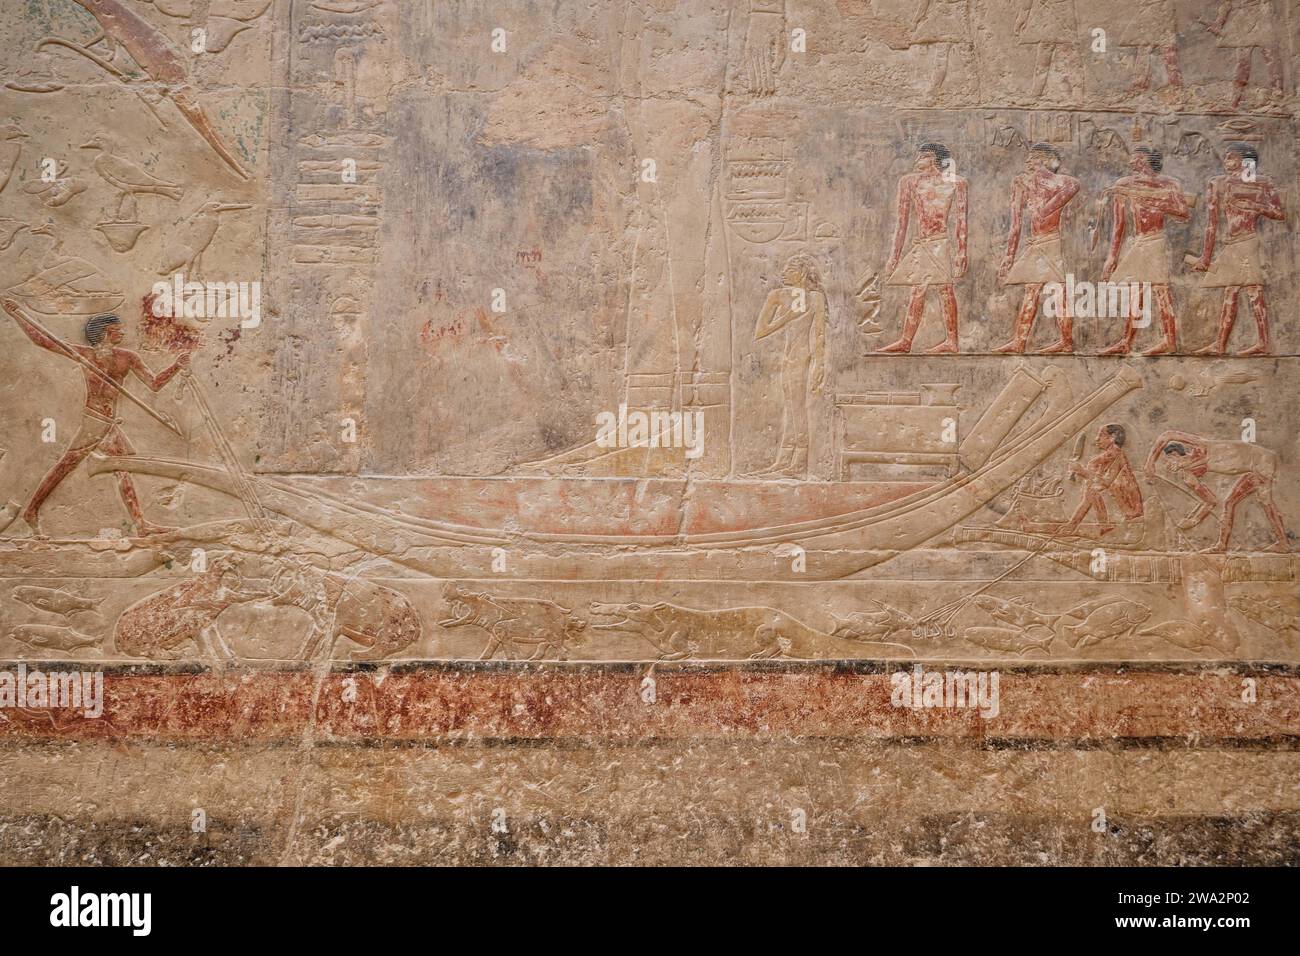 Saqqara, Egypt - January 2, 2024: Painted bas relief figures showing daily life in ancient Egypt inside a mastaba tomb in Saqqara necropolis Stock Photo